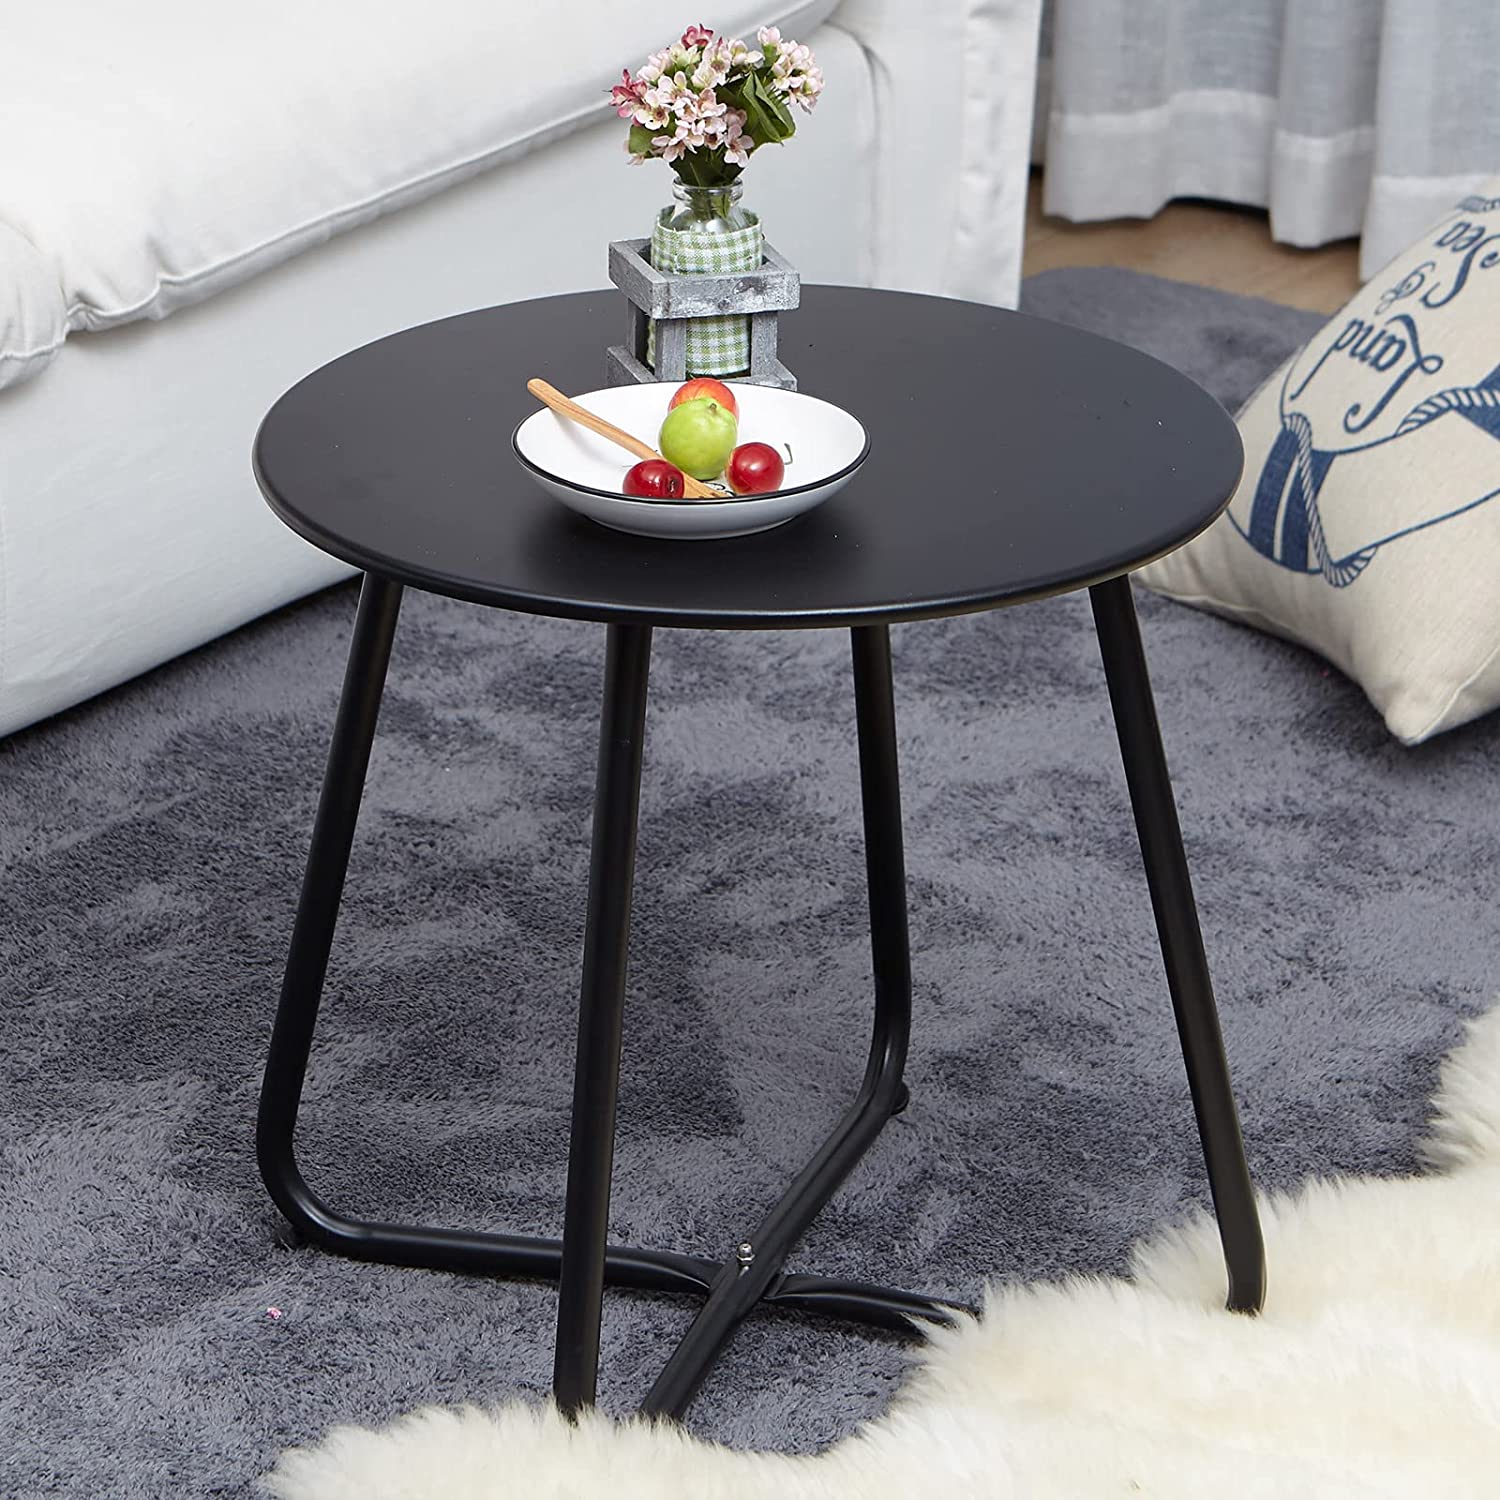 Grand Patio Outdoor&Indoor Steel Patio Side Table, Weather Resistant Outdoor Small Round End Table for Patio, Yard, Balcony, Garden, Living Room, Bedroom, Black - image 5 of 9